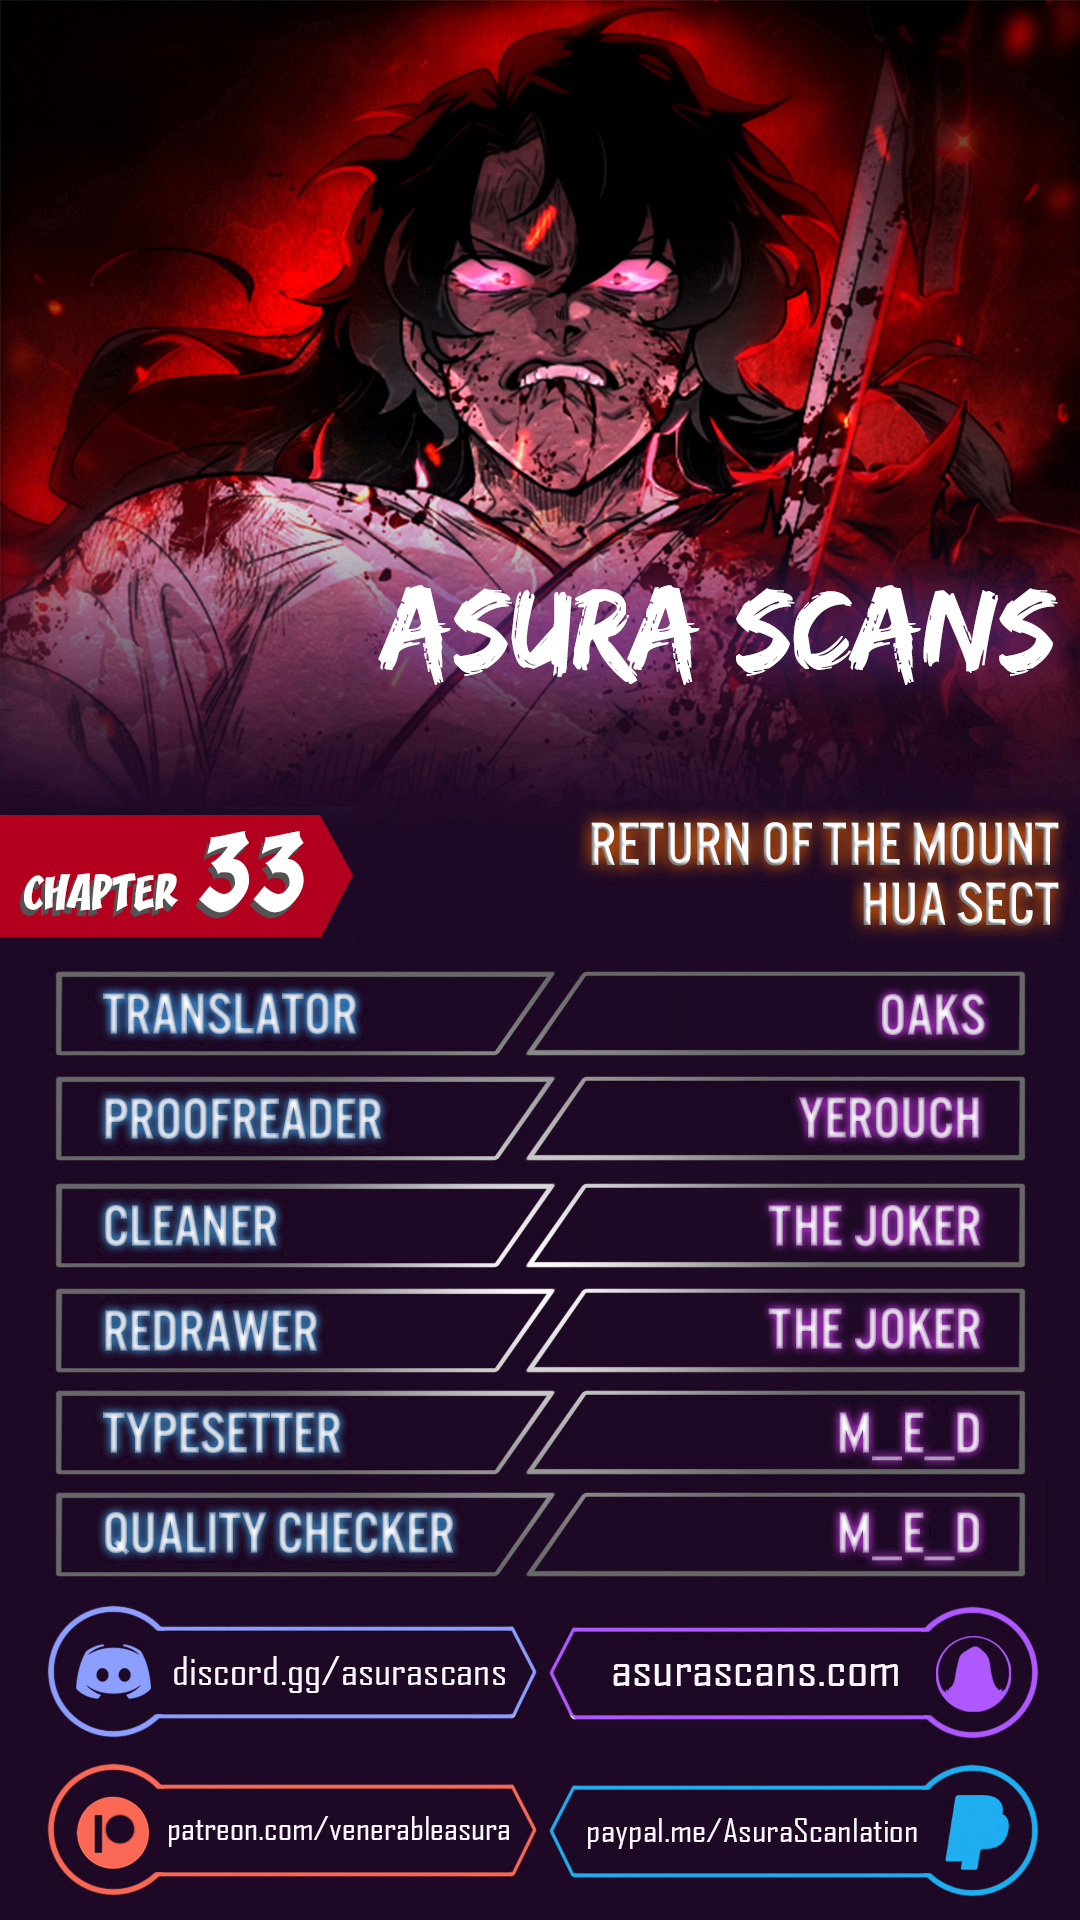 Return of the Mount Hua Sect - Chapter 11657 - Image 1